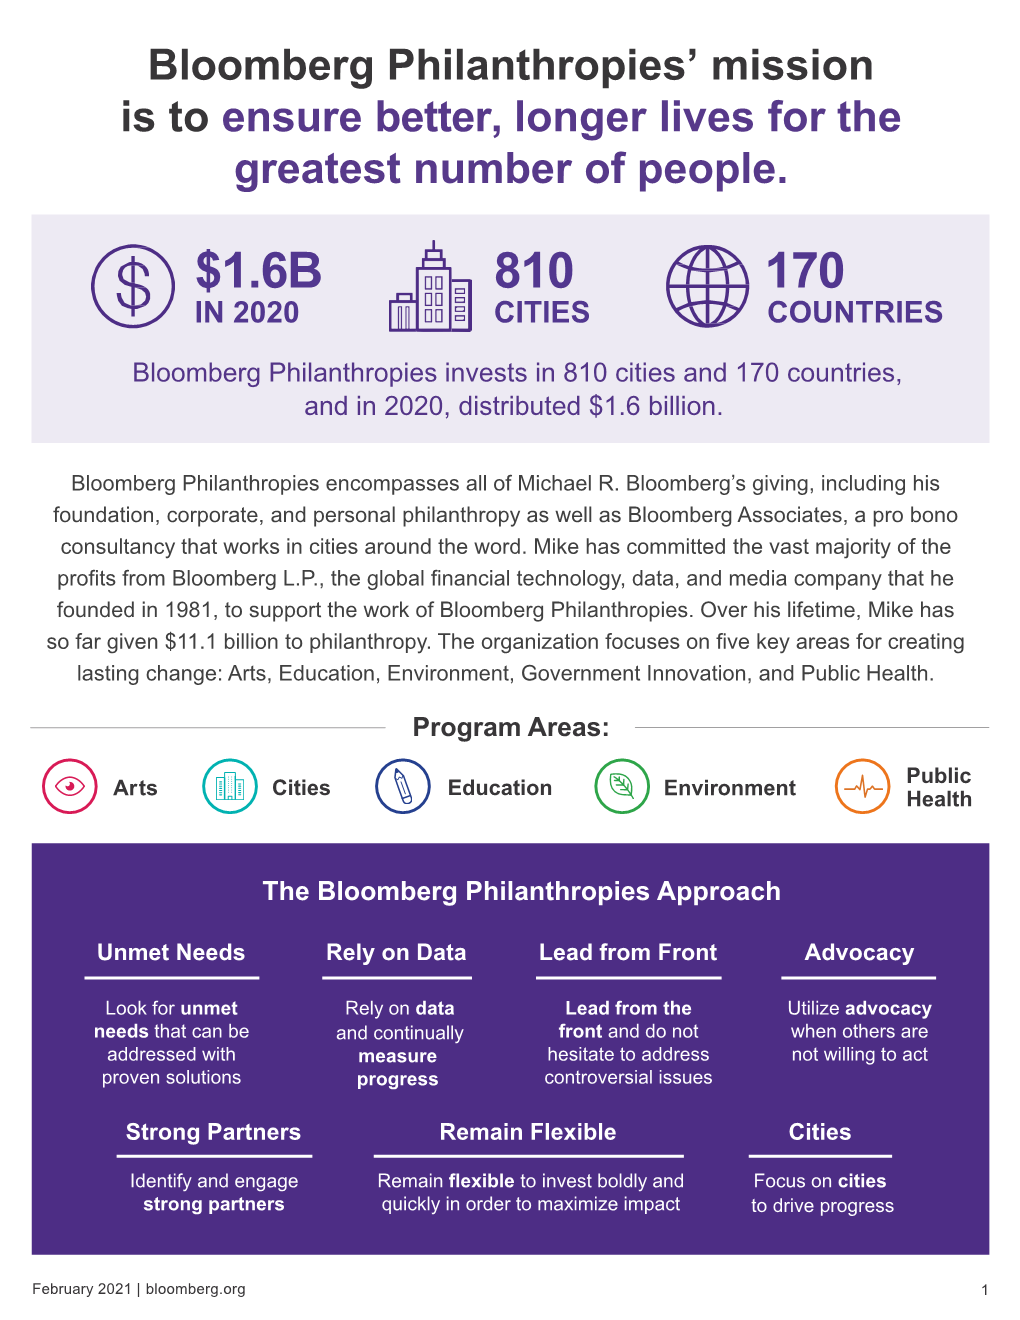 Bloomberg Philanthropies' Mission Is to Ensure Better, Longer Lives for the Greatest Number of People